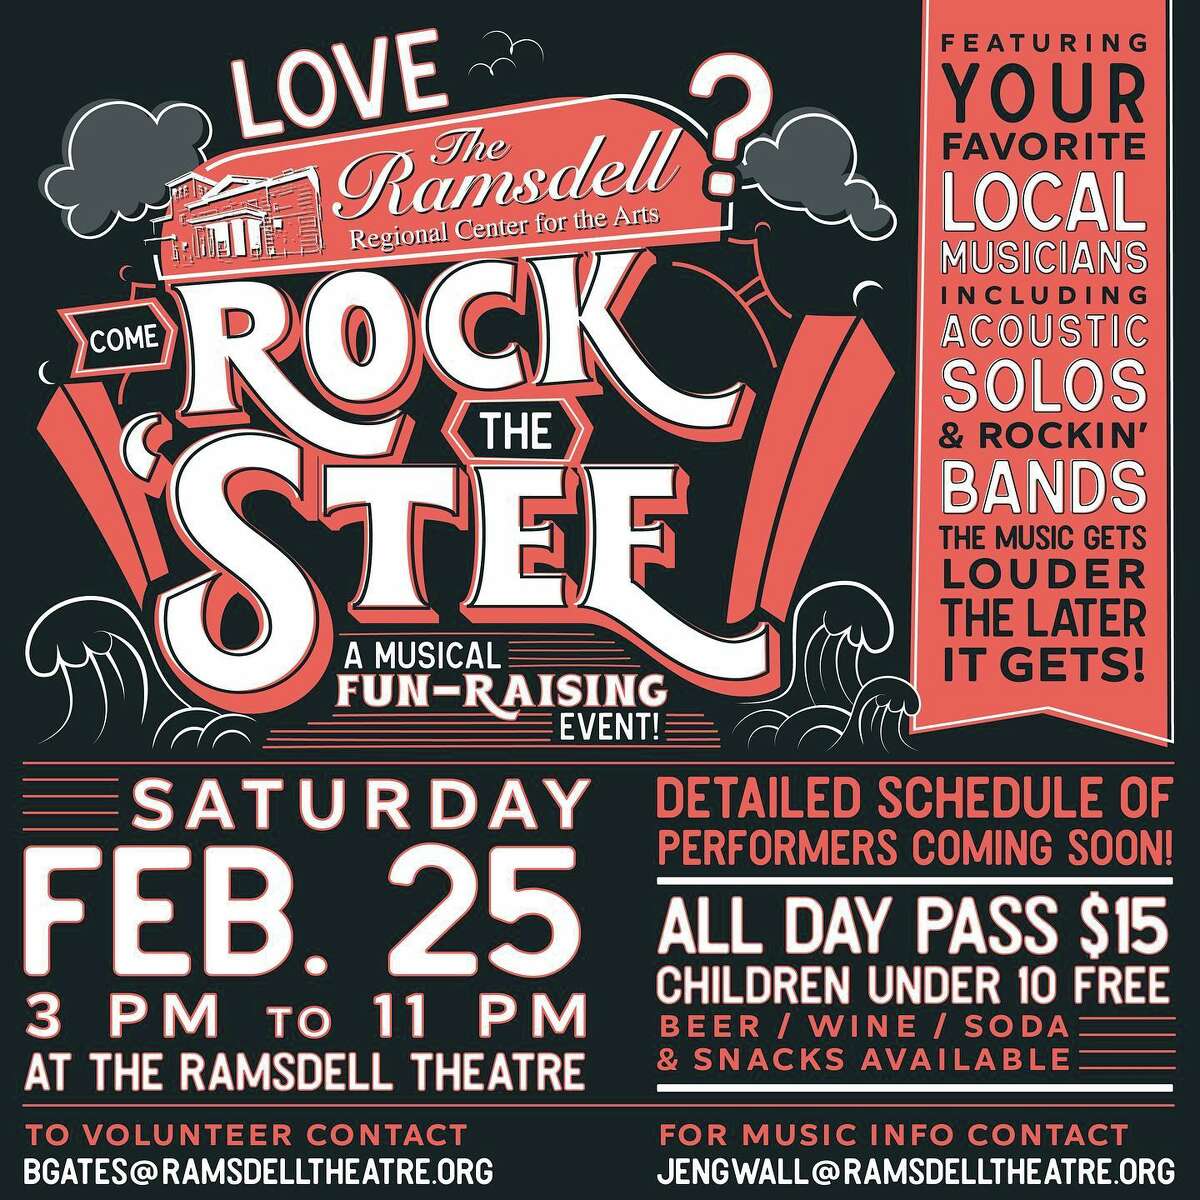 A concert fundraiser featuring about a dozen local musicians will be held on Feb. 25 at the Ramsdell Regional Center for the Arts.